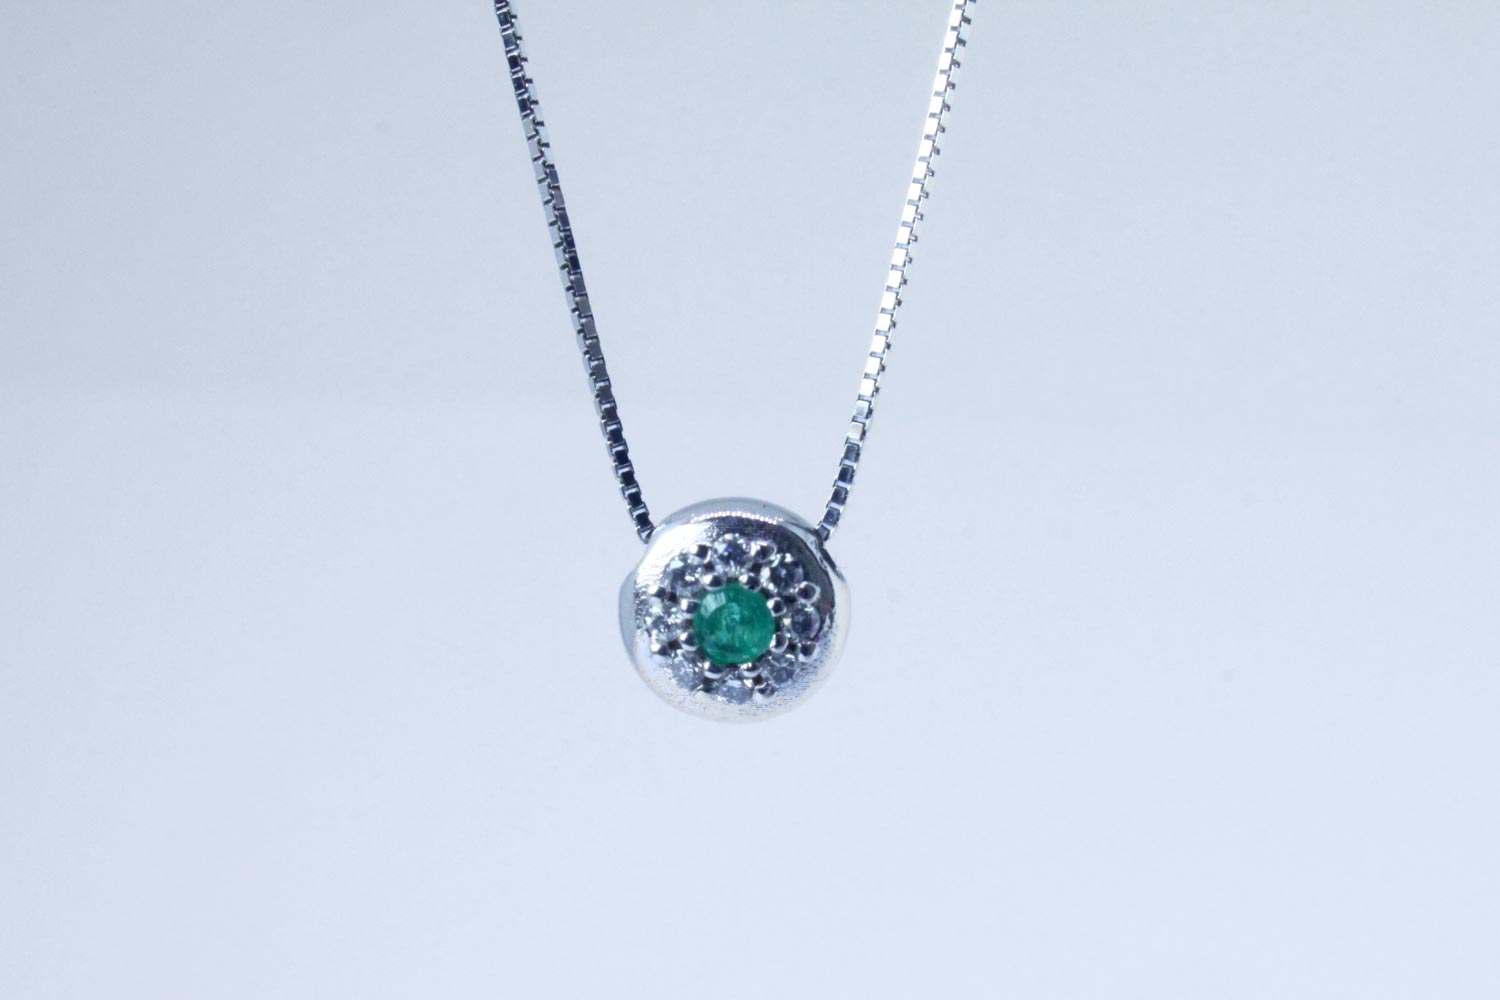 White gold pendant with diamonds and emerald Bold collection necklace 45-50 cm